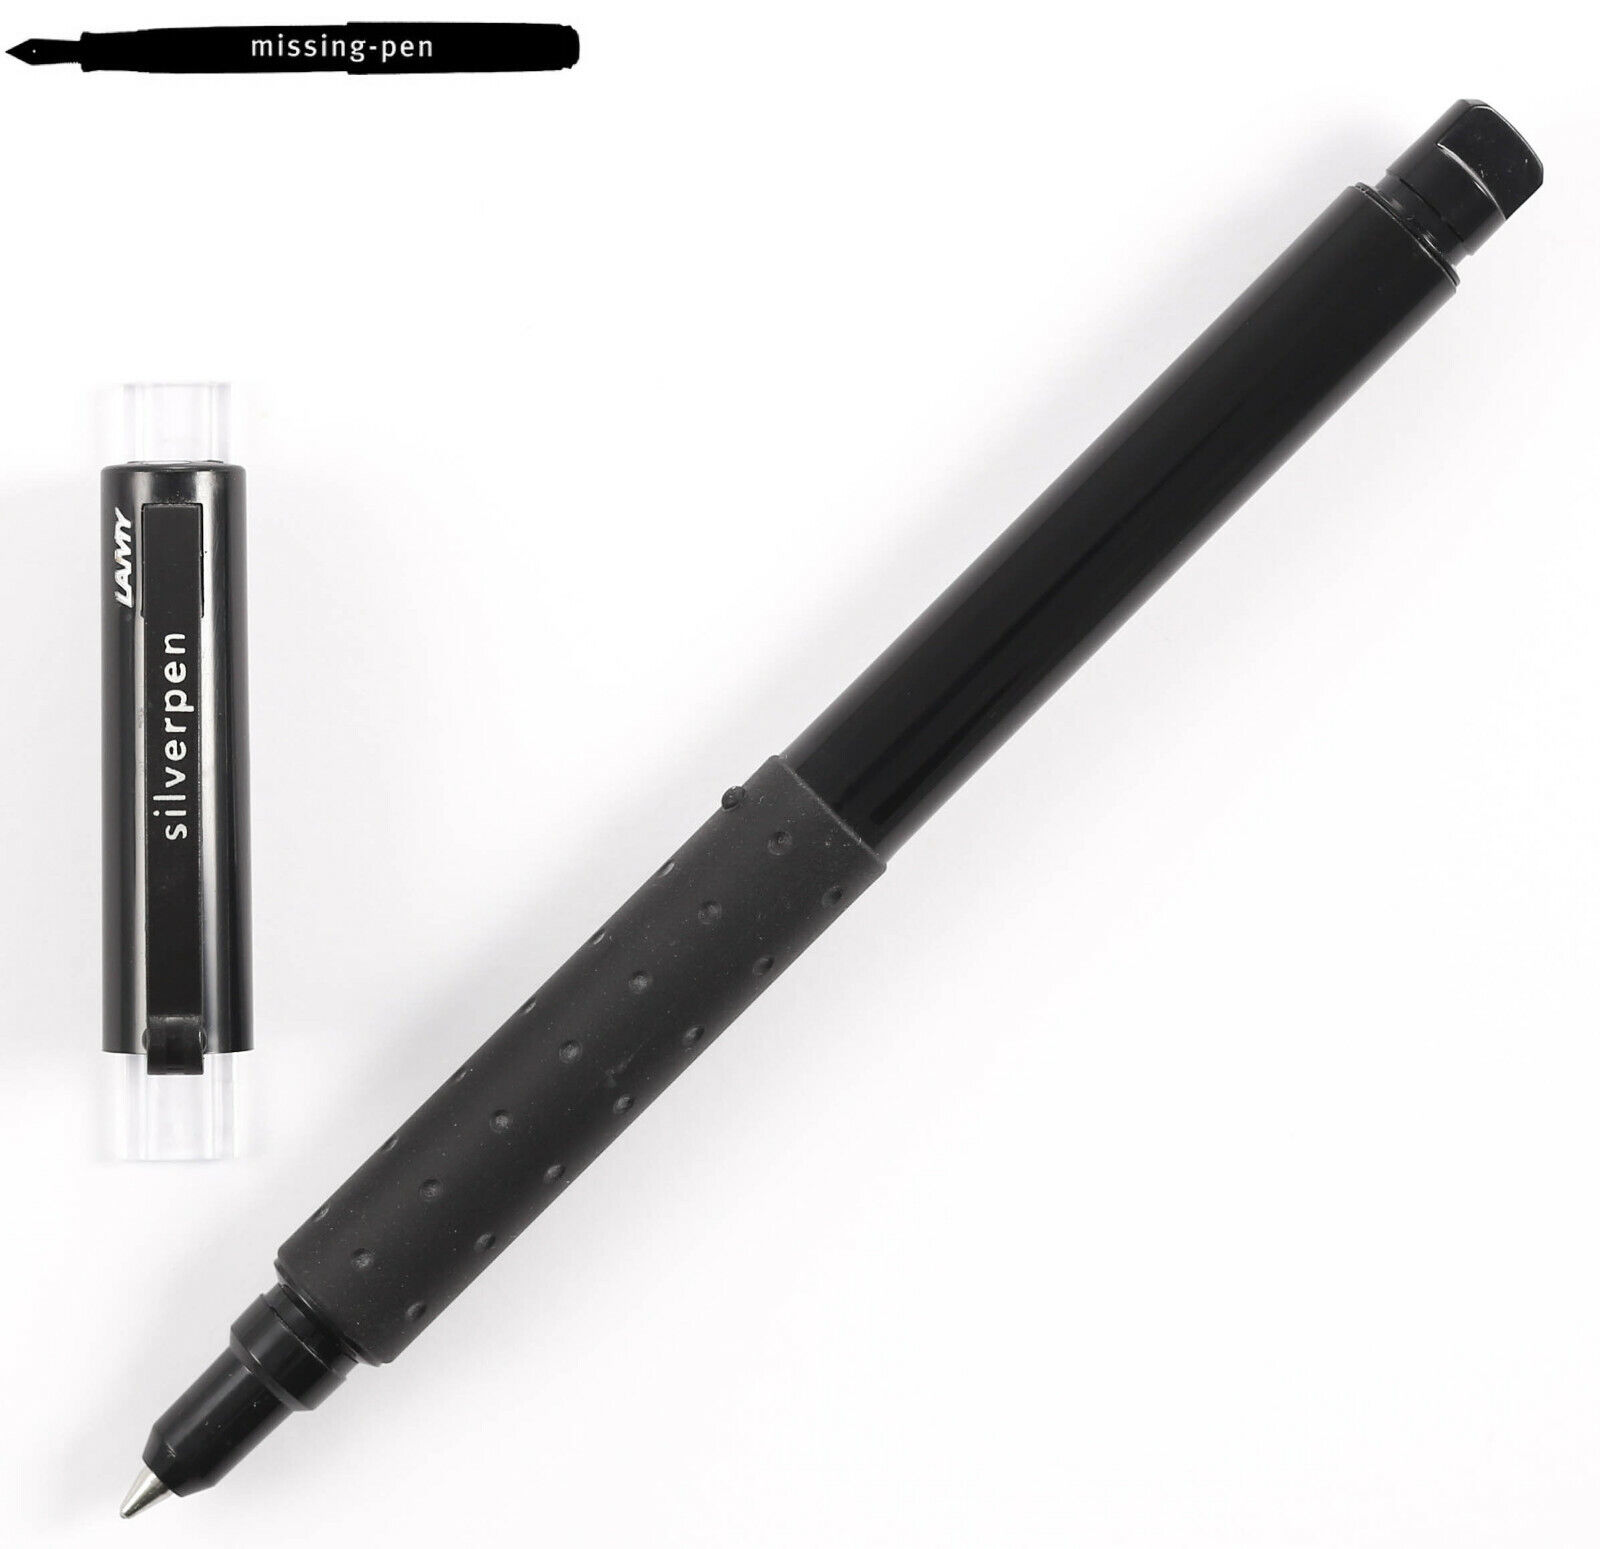 Old Lamy silverpen Rollerball Pen in Black model 379 with current refill